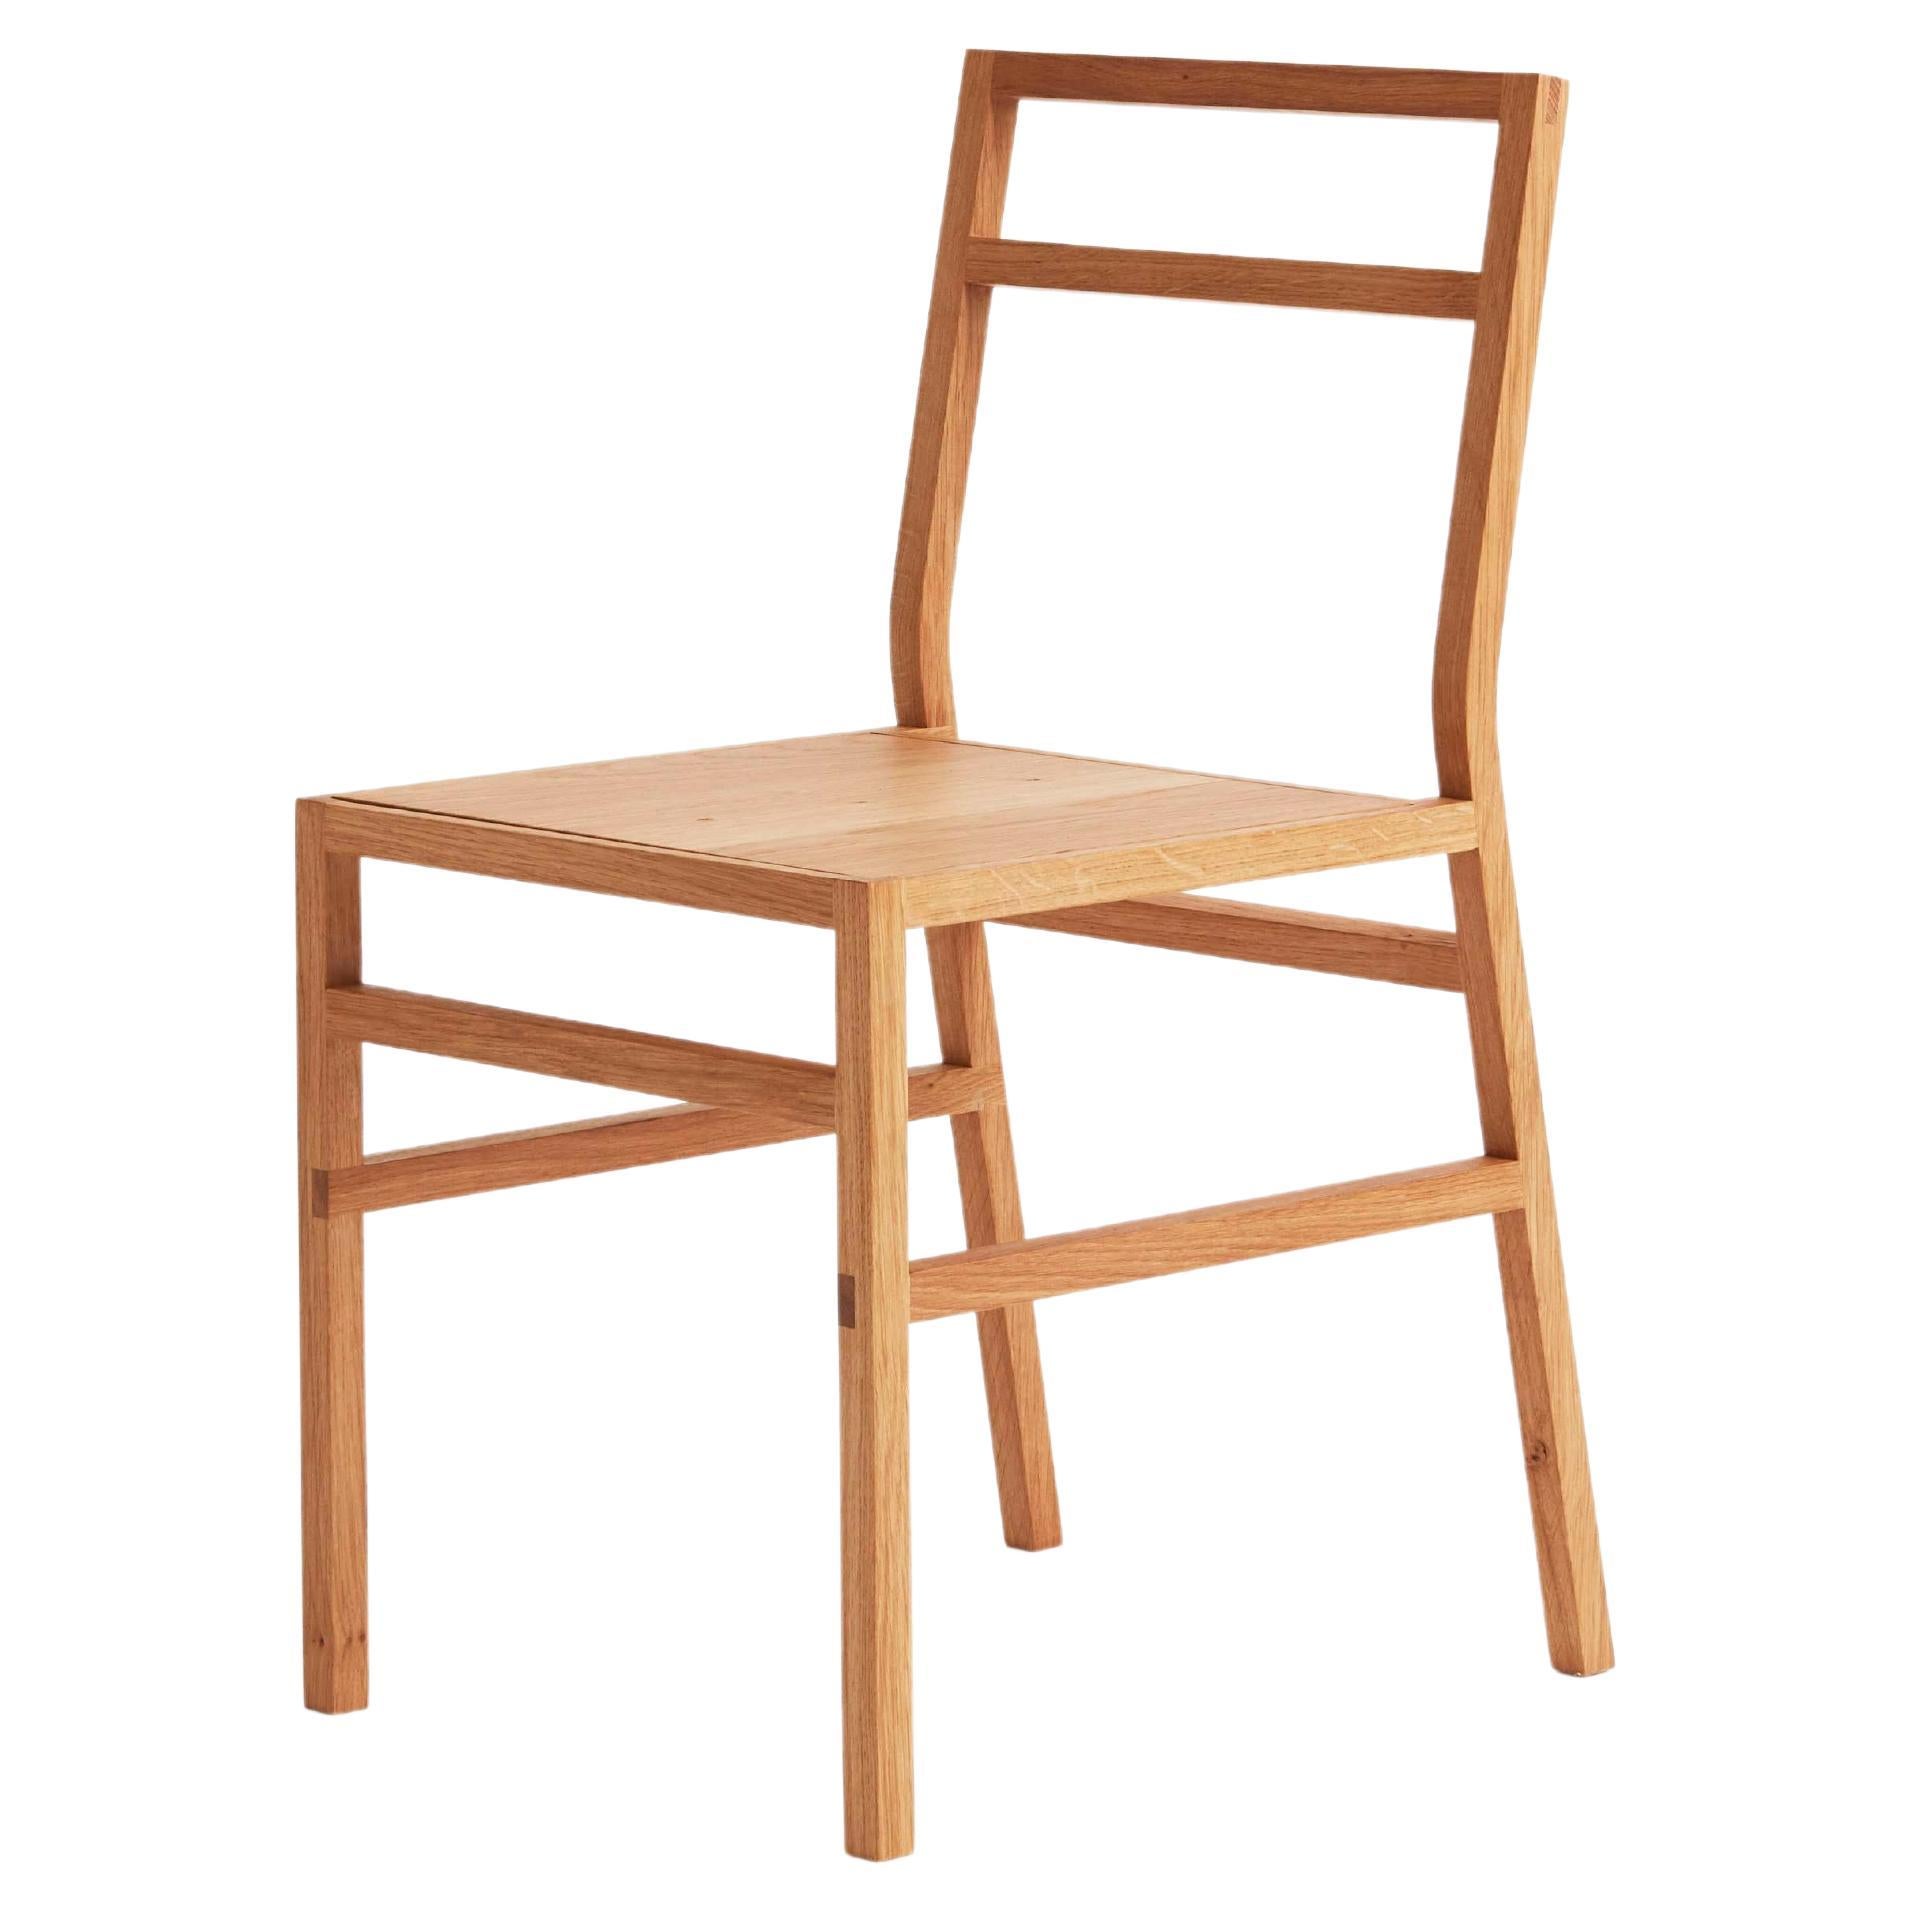 Minimalist Dining Chair, by James Torble, Loose Fit Furniture, UK